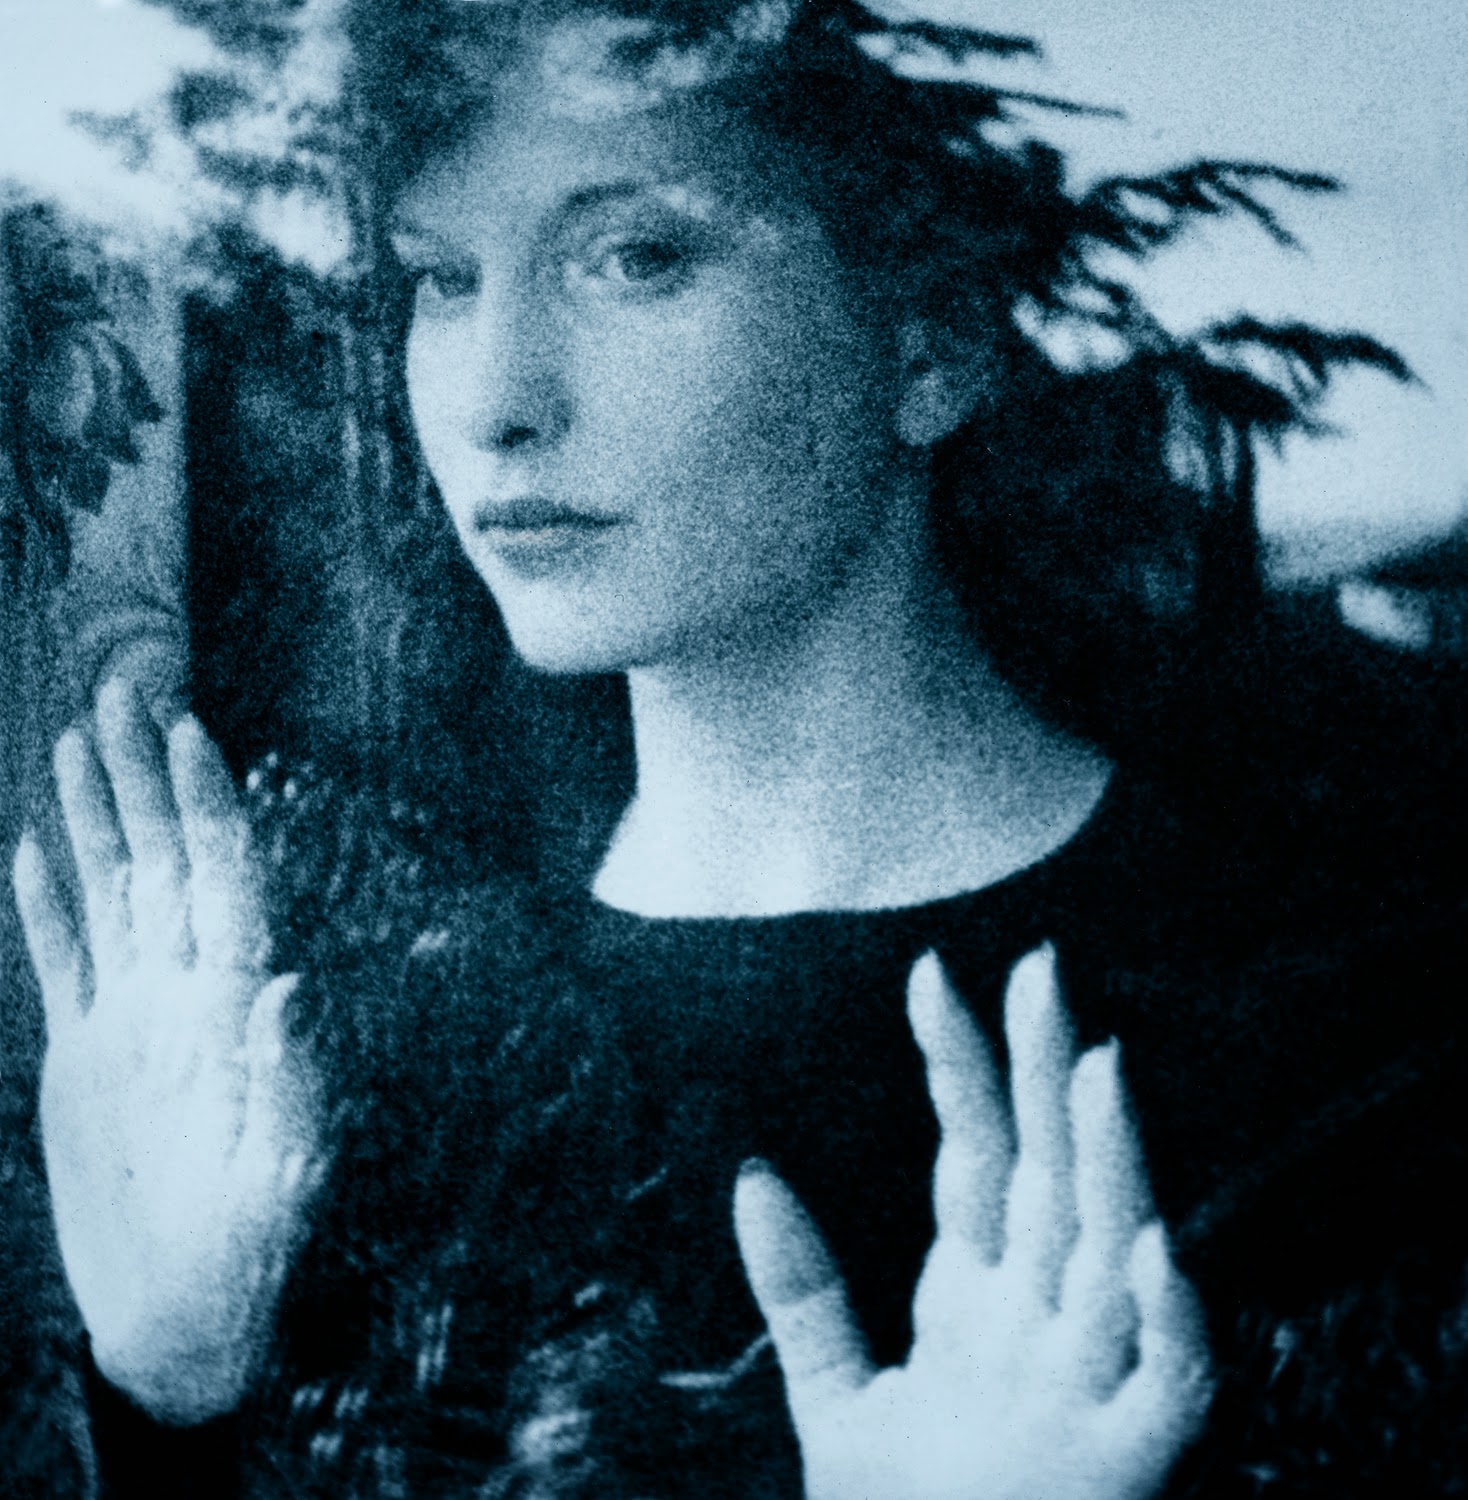 Maya Deren in "Meshes of the Afternoon" 